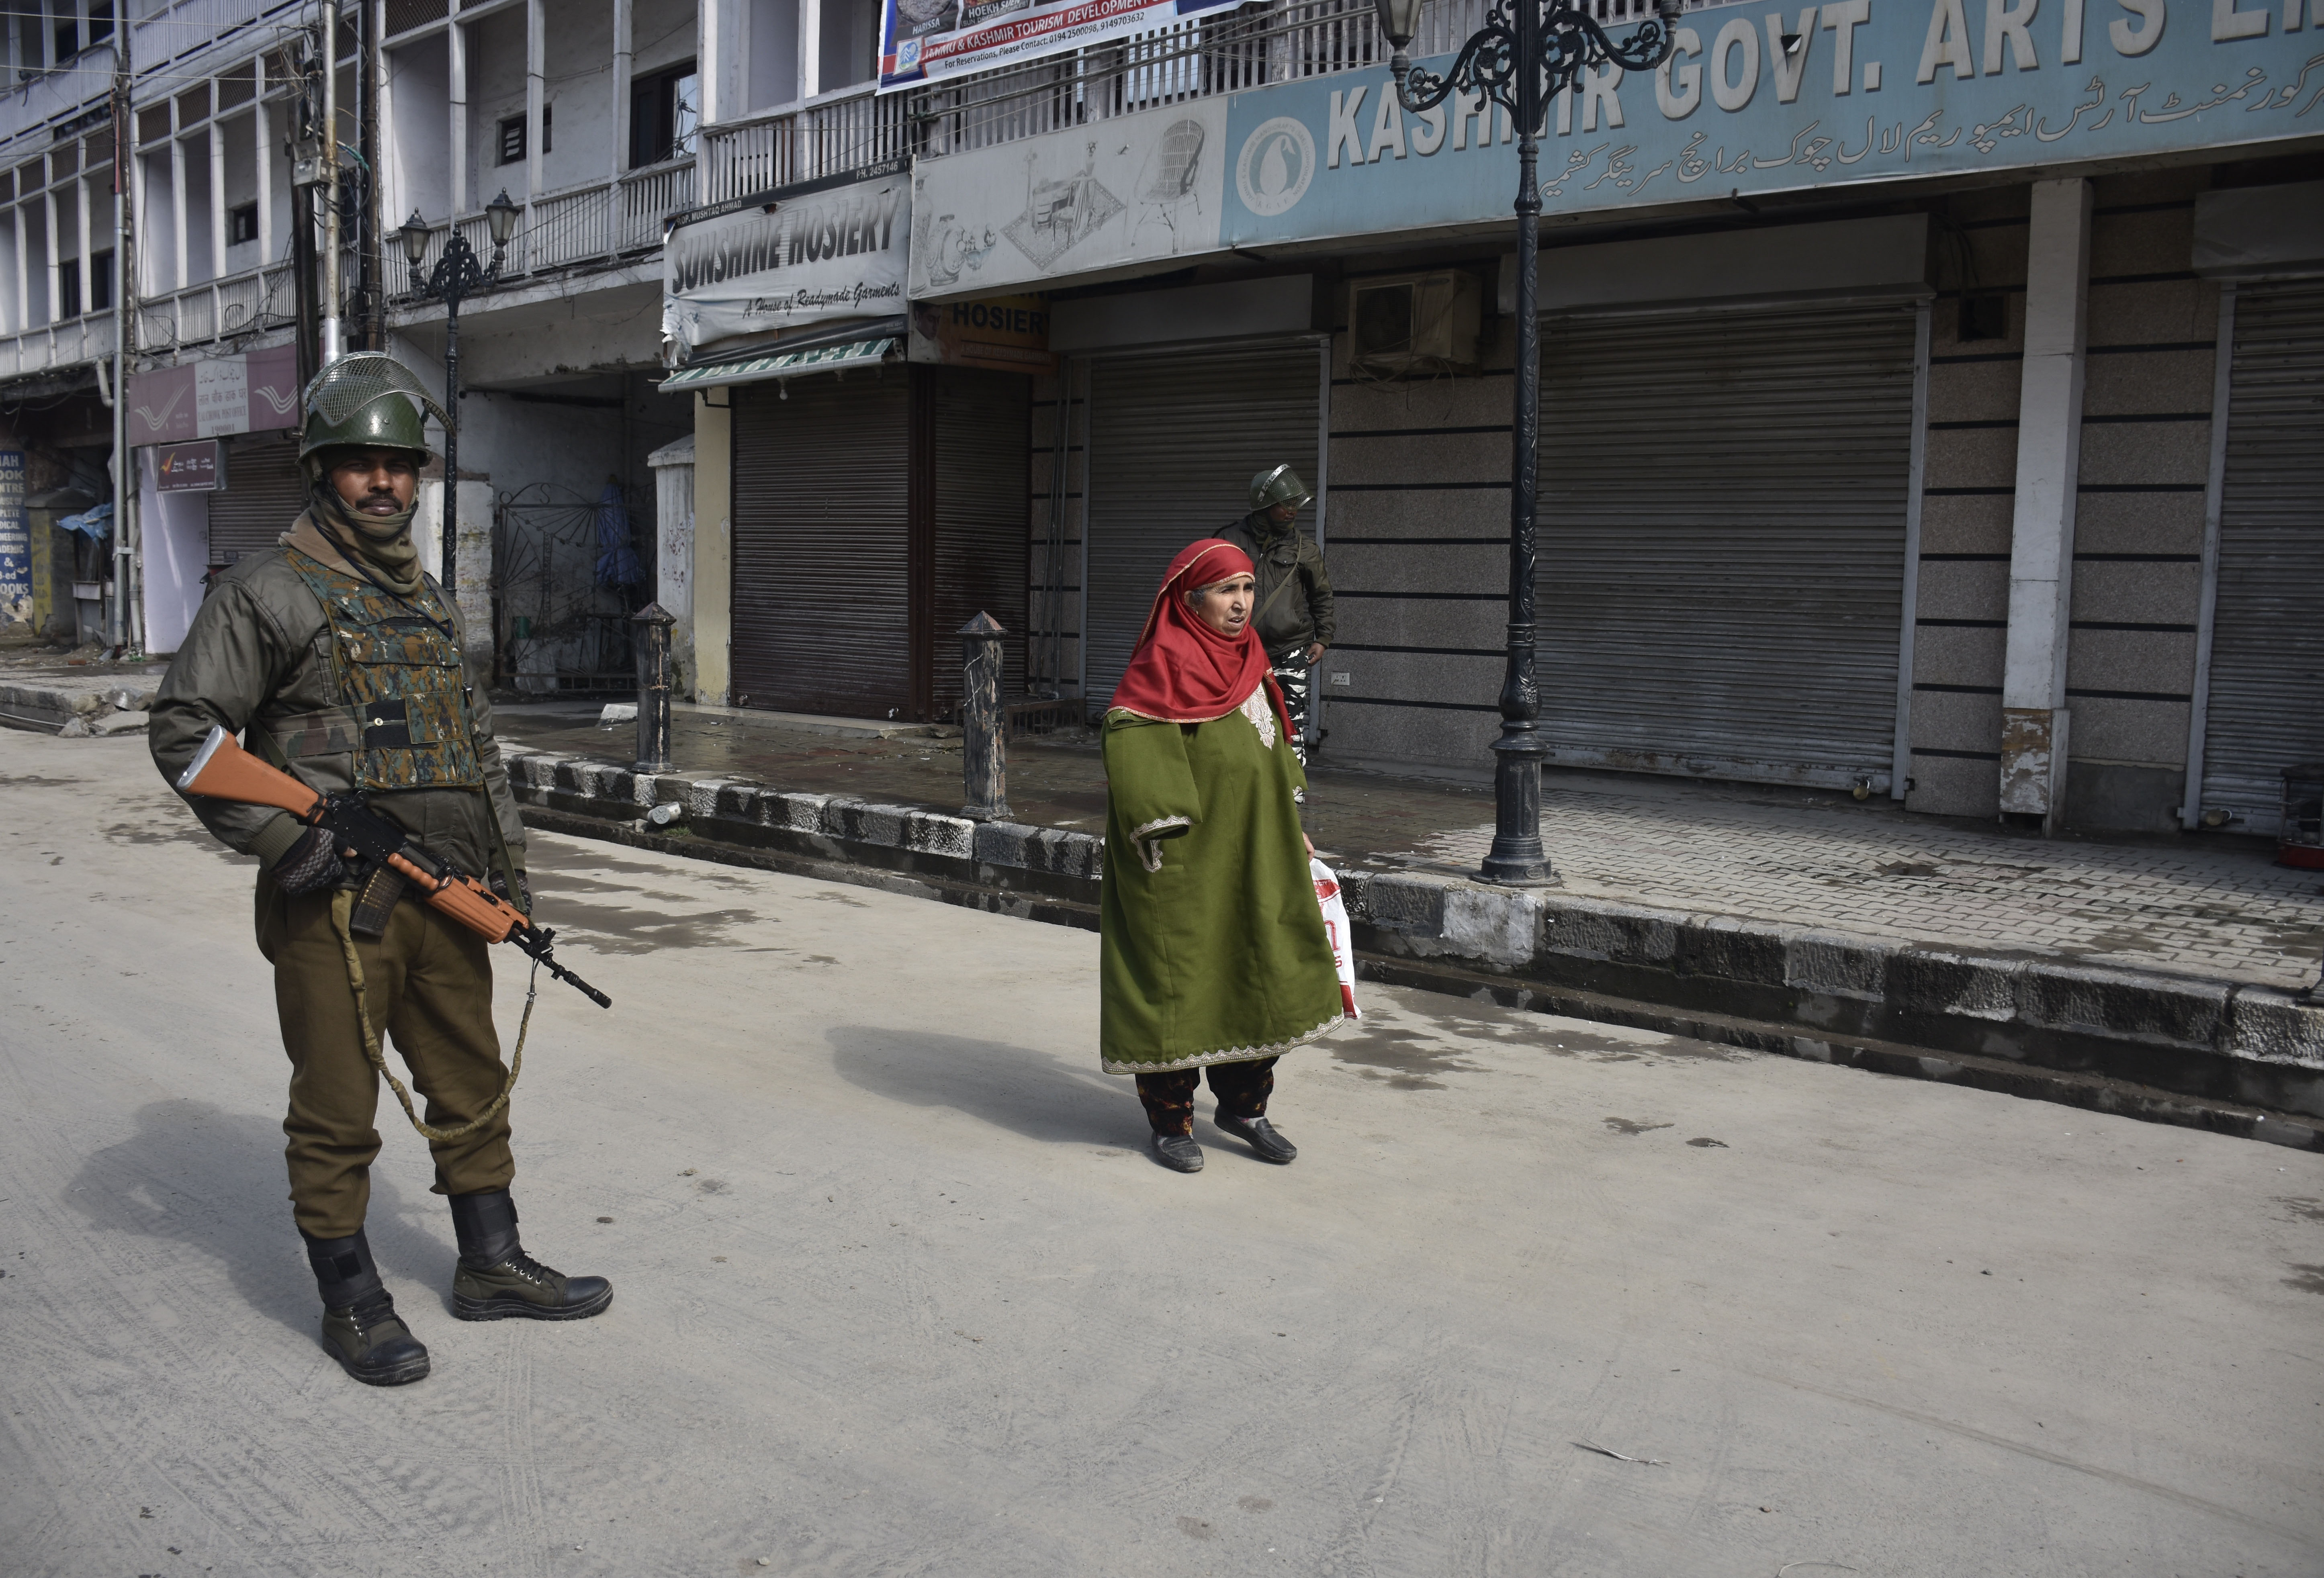 Parties to not forget J-K region as campaign gaining momentum in region